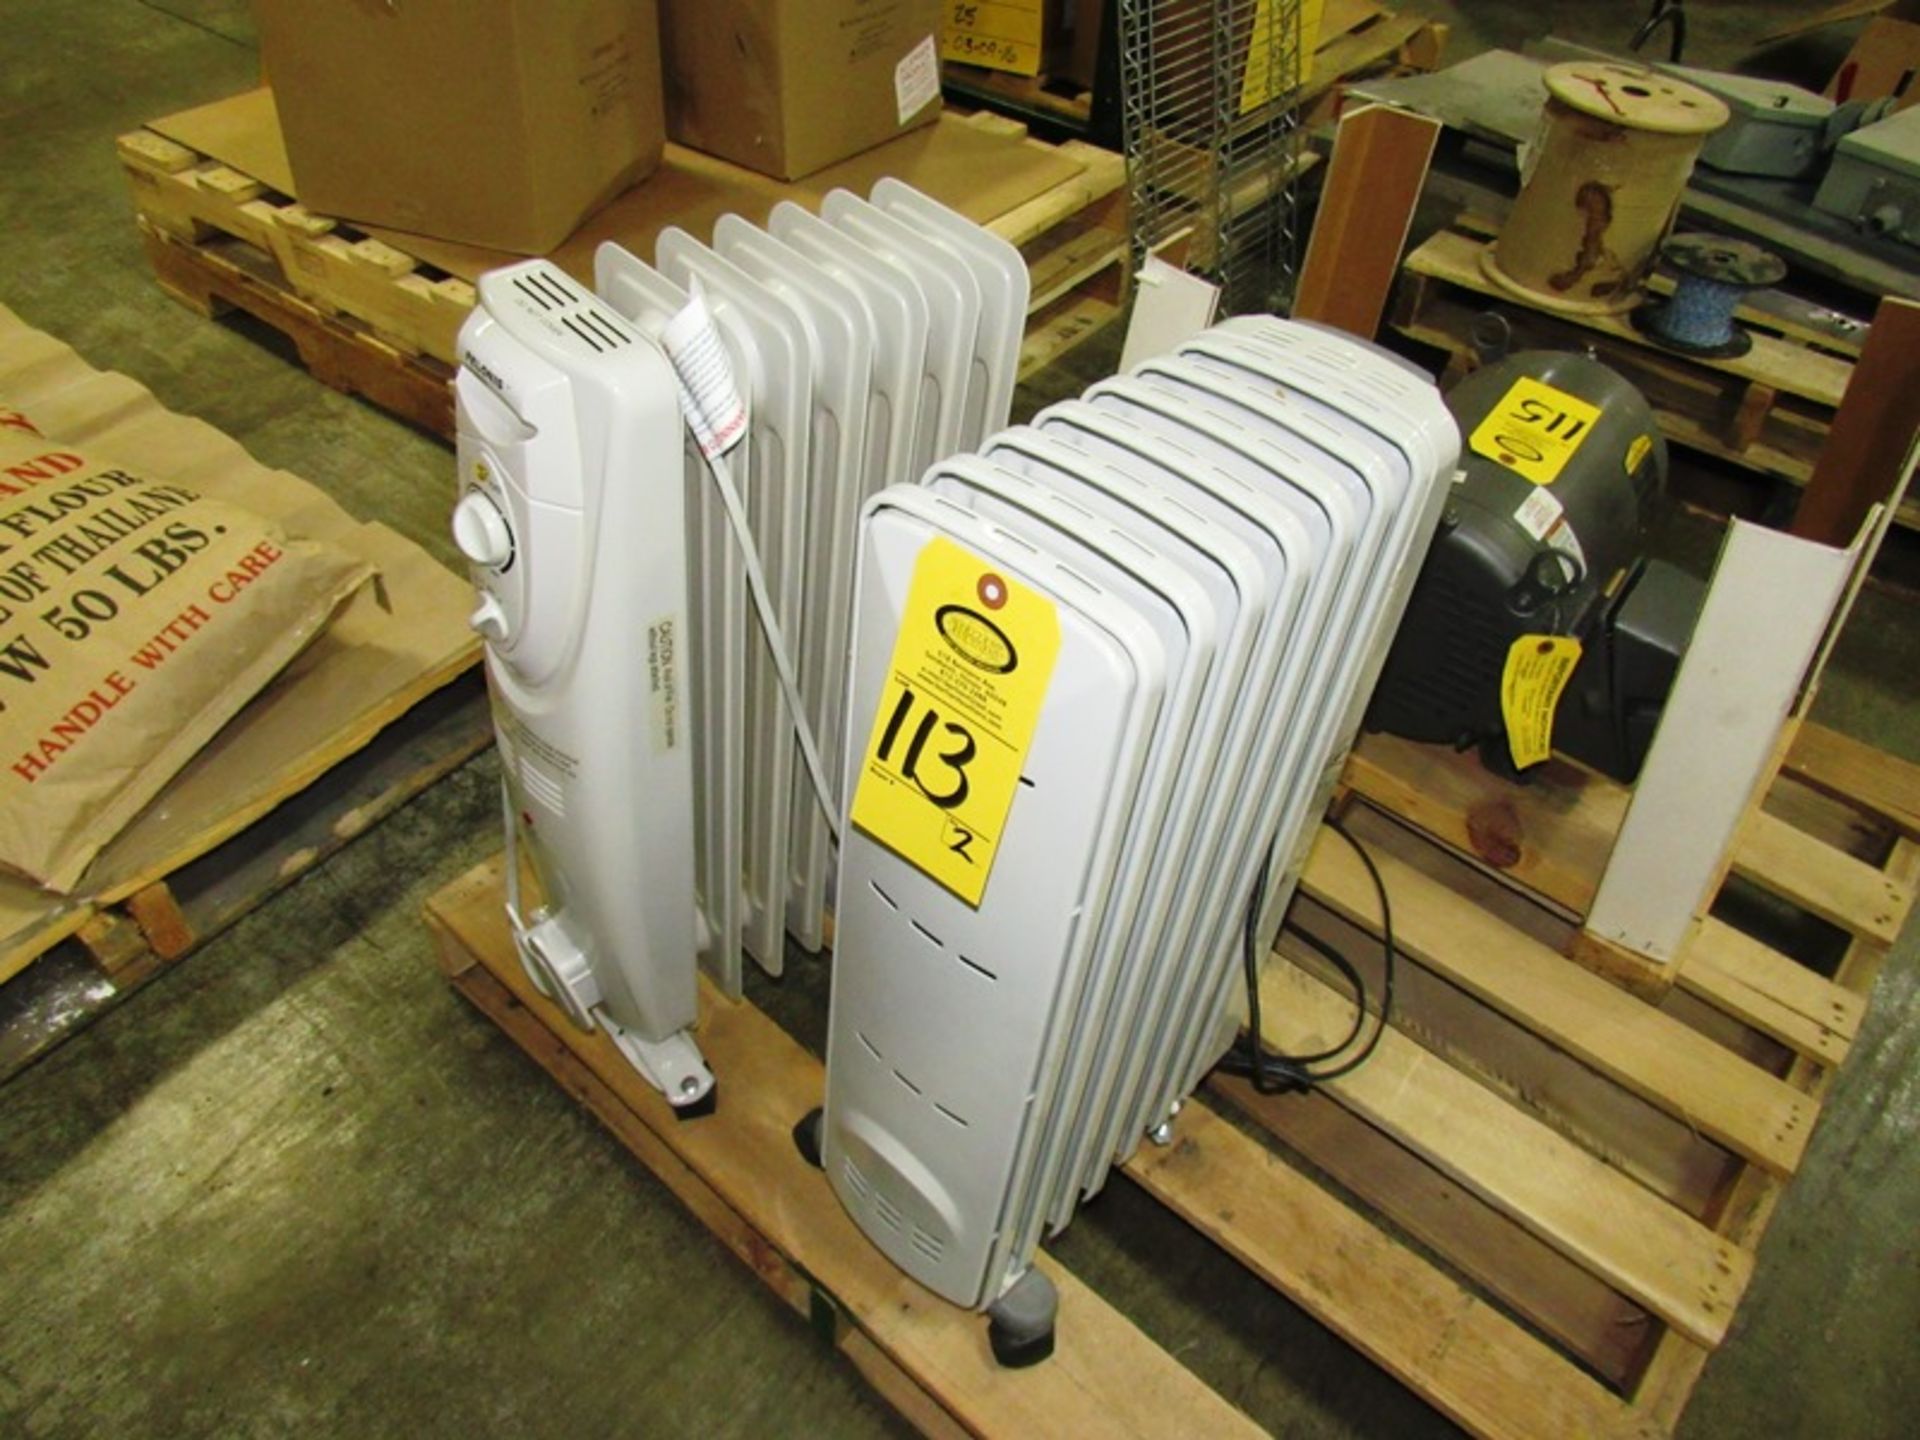 Pelonis Portable Space Heaters (Removal Begins July 5th) Loading Fee $35 Rigger: Norm Pavlish (